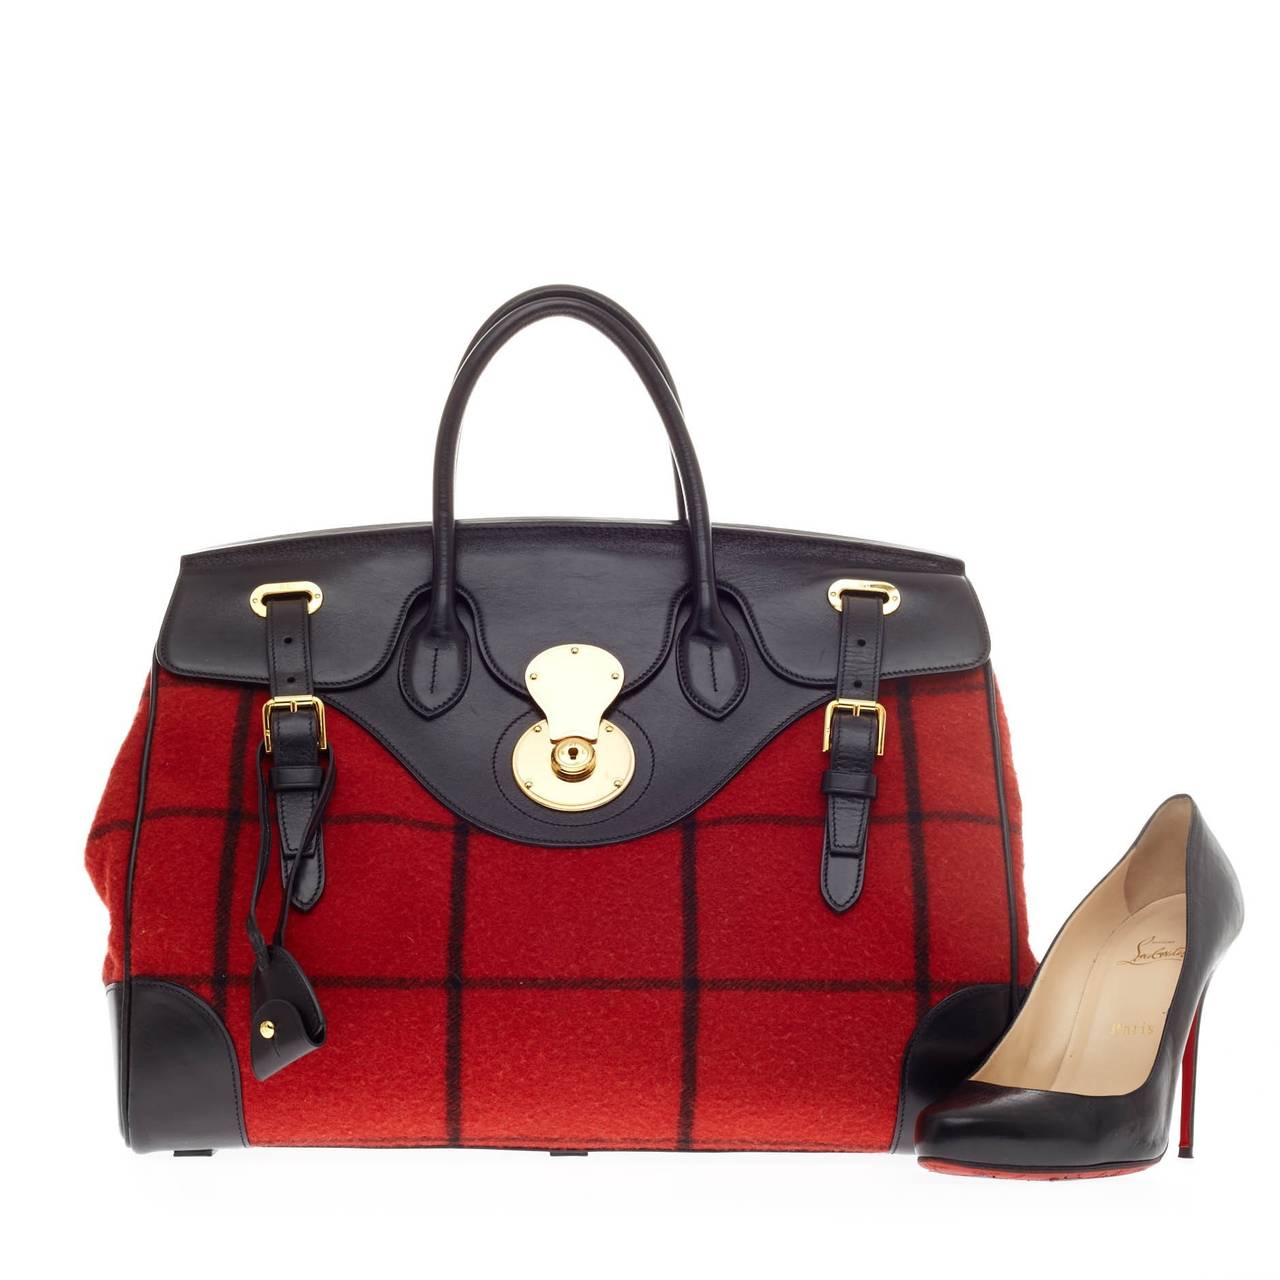 This authentic Ralph Lauren Ricky Satchel Tartan showcasing the brand's most popular design is a stylish bag perfect for every fashionista. Crafted from black leather and red and black window panel tartan wool, this uniquely sleek satchel features a